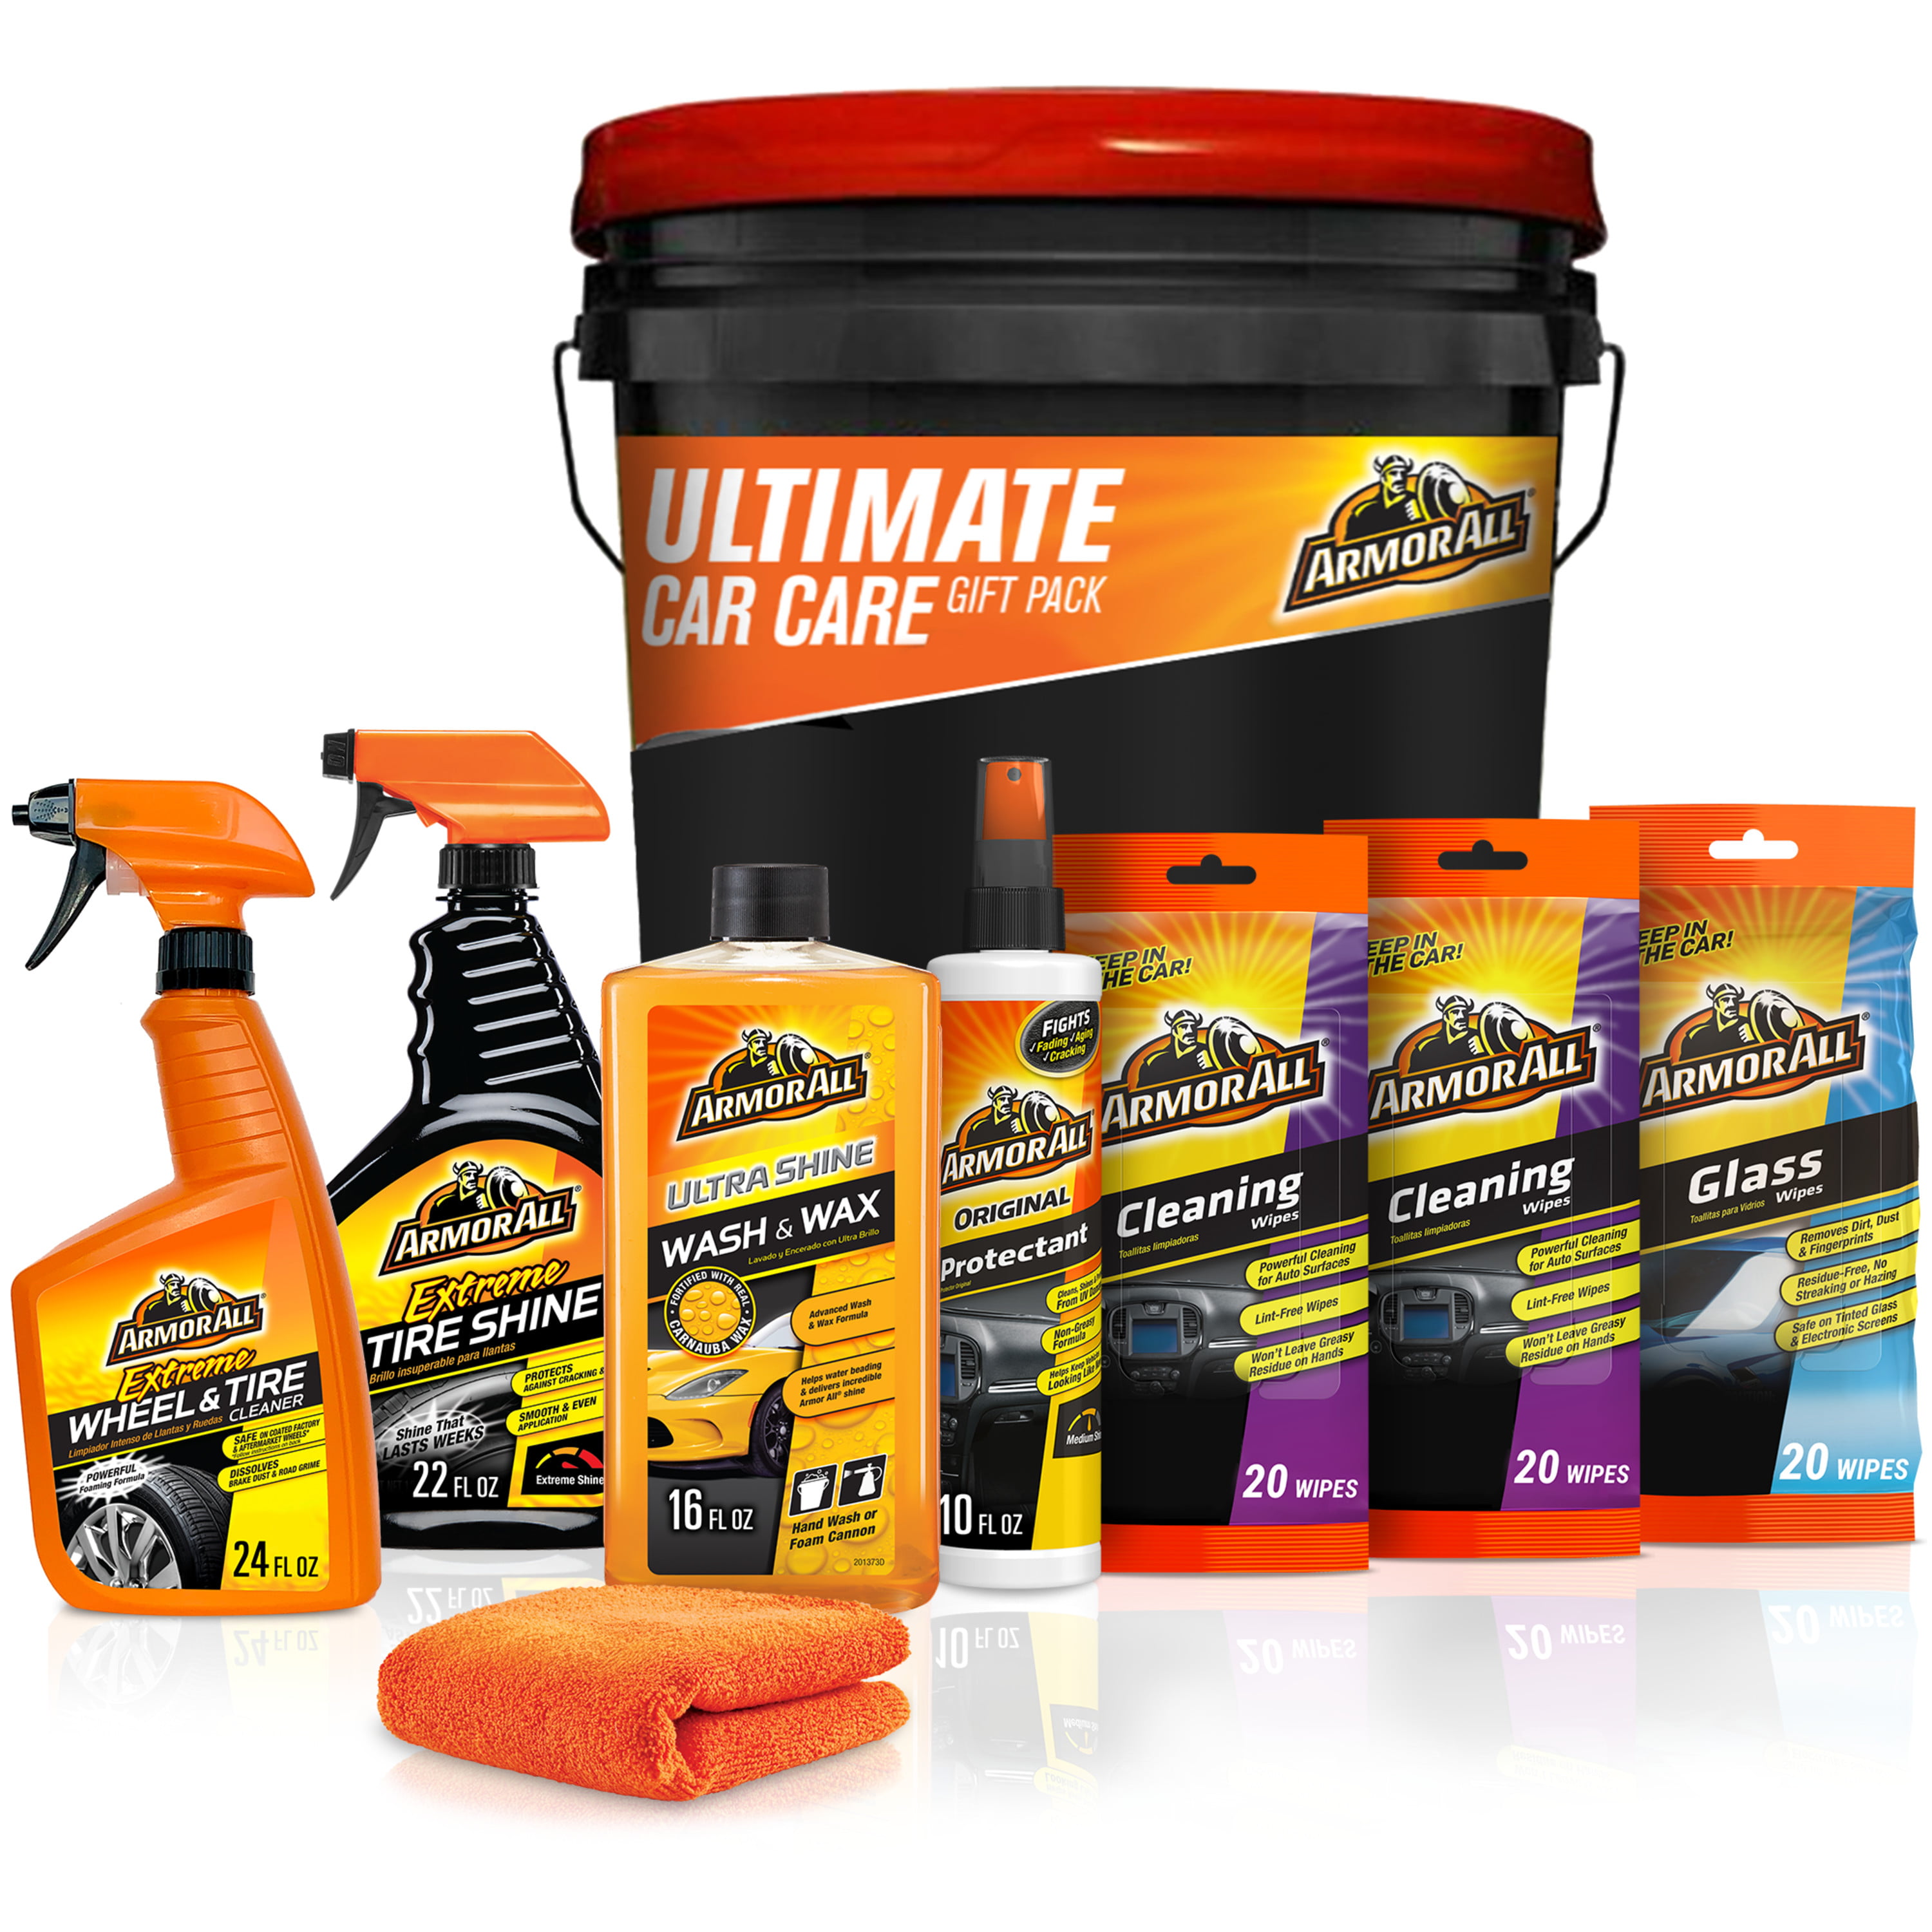 10-Pc Armor All Ultimate Auto Cleaners Car Care Set $22.90 + Free S&H w/ Walmart+ or $35+